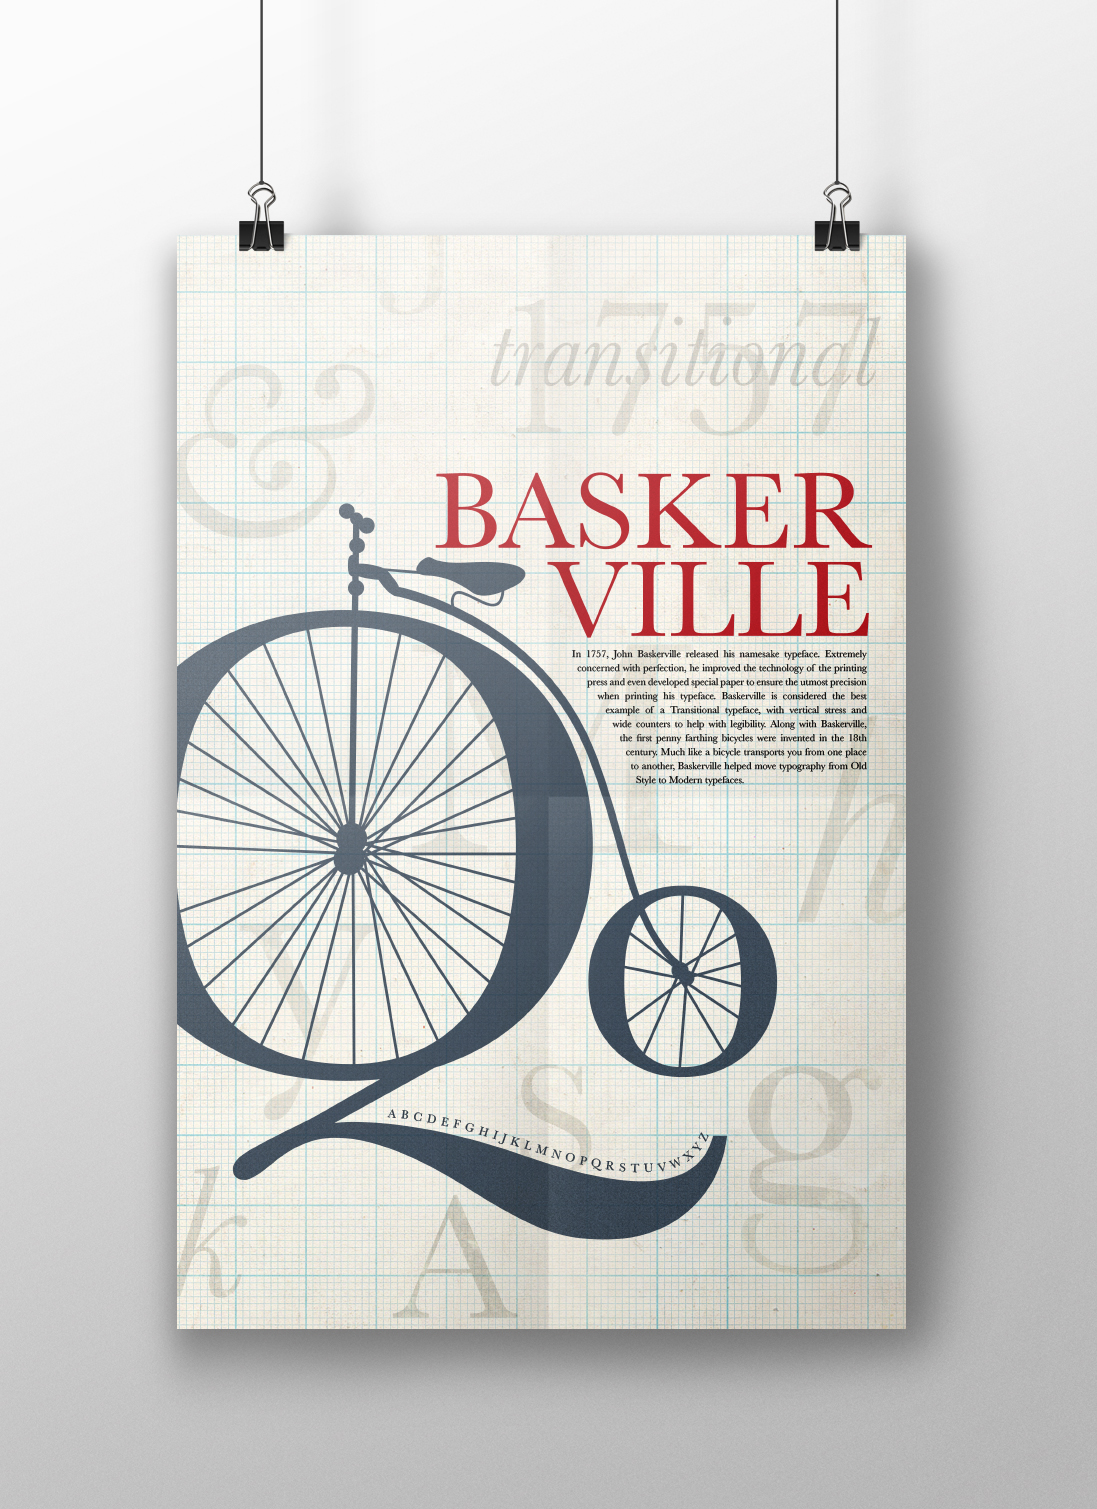 Baskerville type Typeface grid structure Bike Bicycle old fashioned old penny farthing pennyfarthing